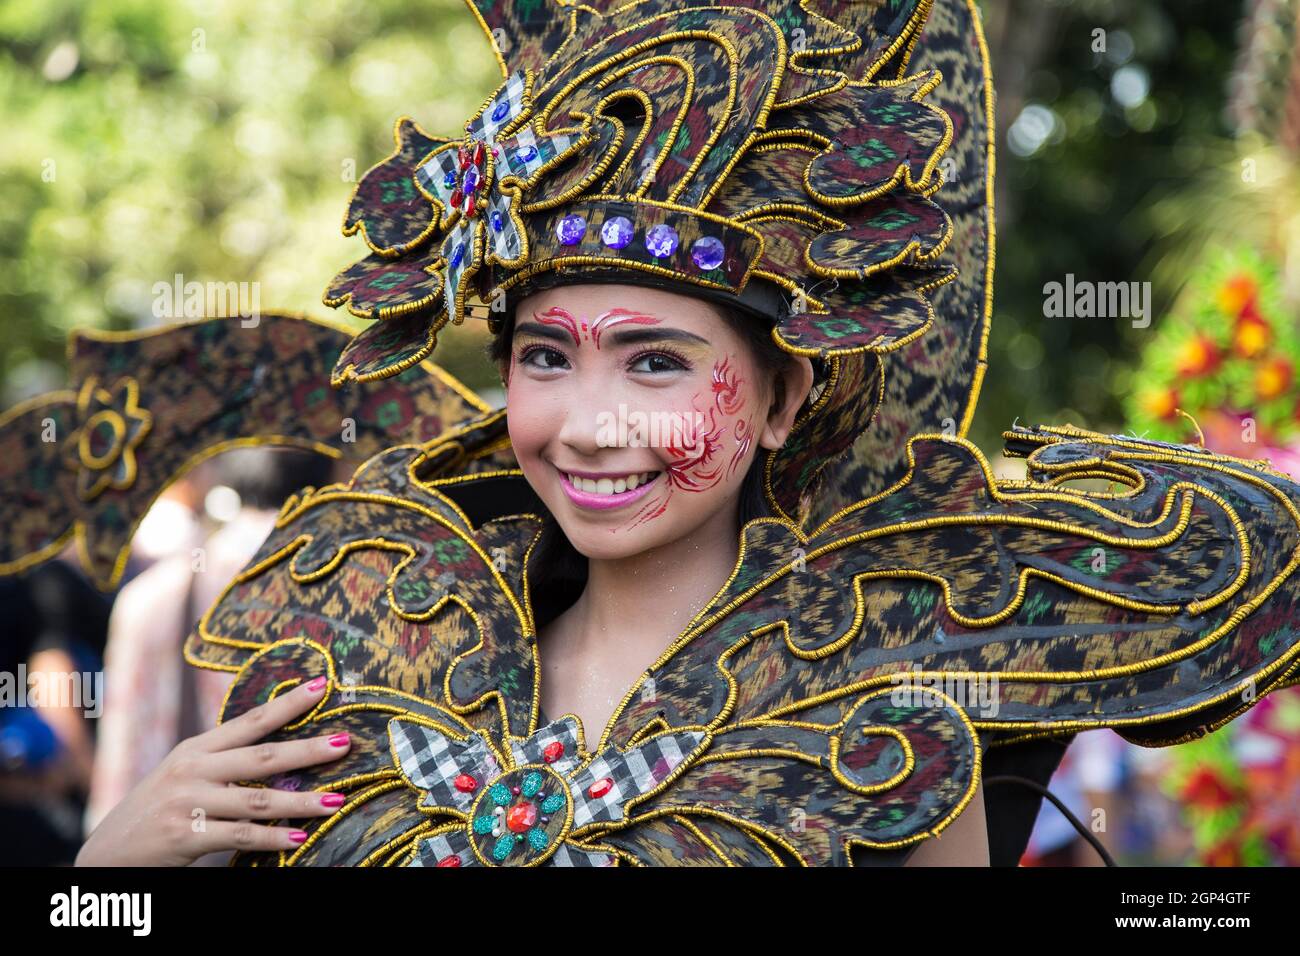 INDONESIA, BALI. PORTRAIT OF A YOUNG GIRL DURING THE BALI ART FESTIVAL. Stock Photo